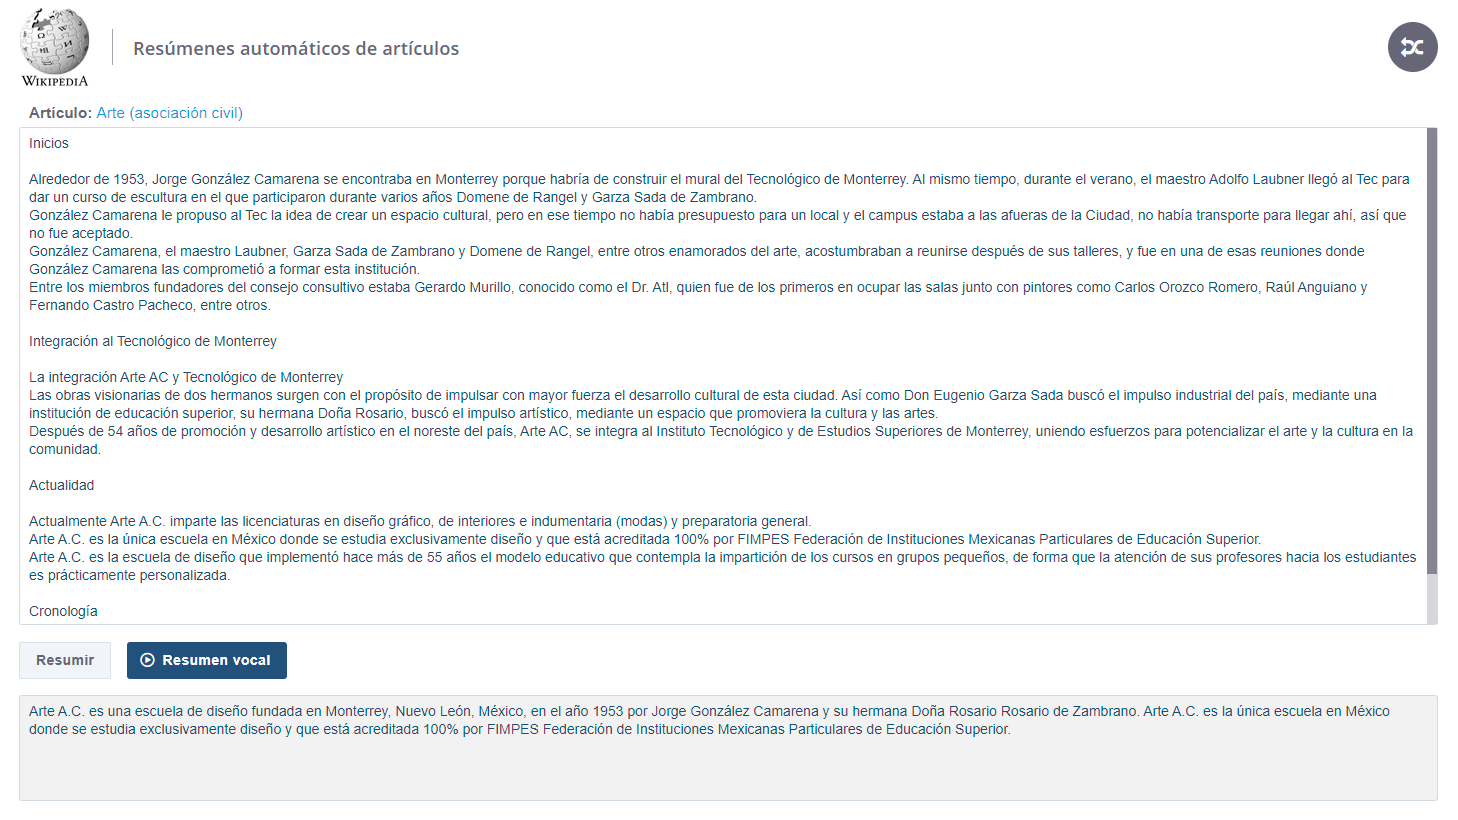 Wikipedia Spanish - Text and vocal summaries of Wikipedia articles in Spanish.